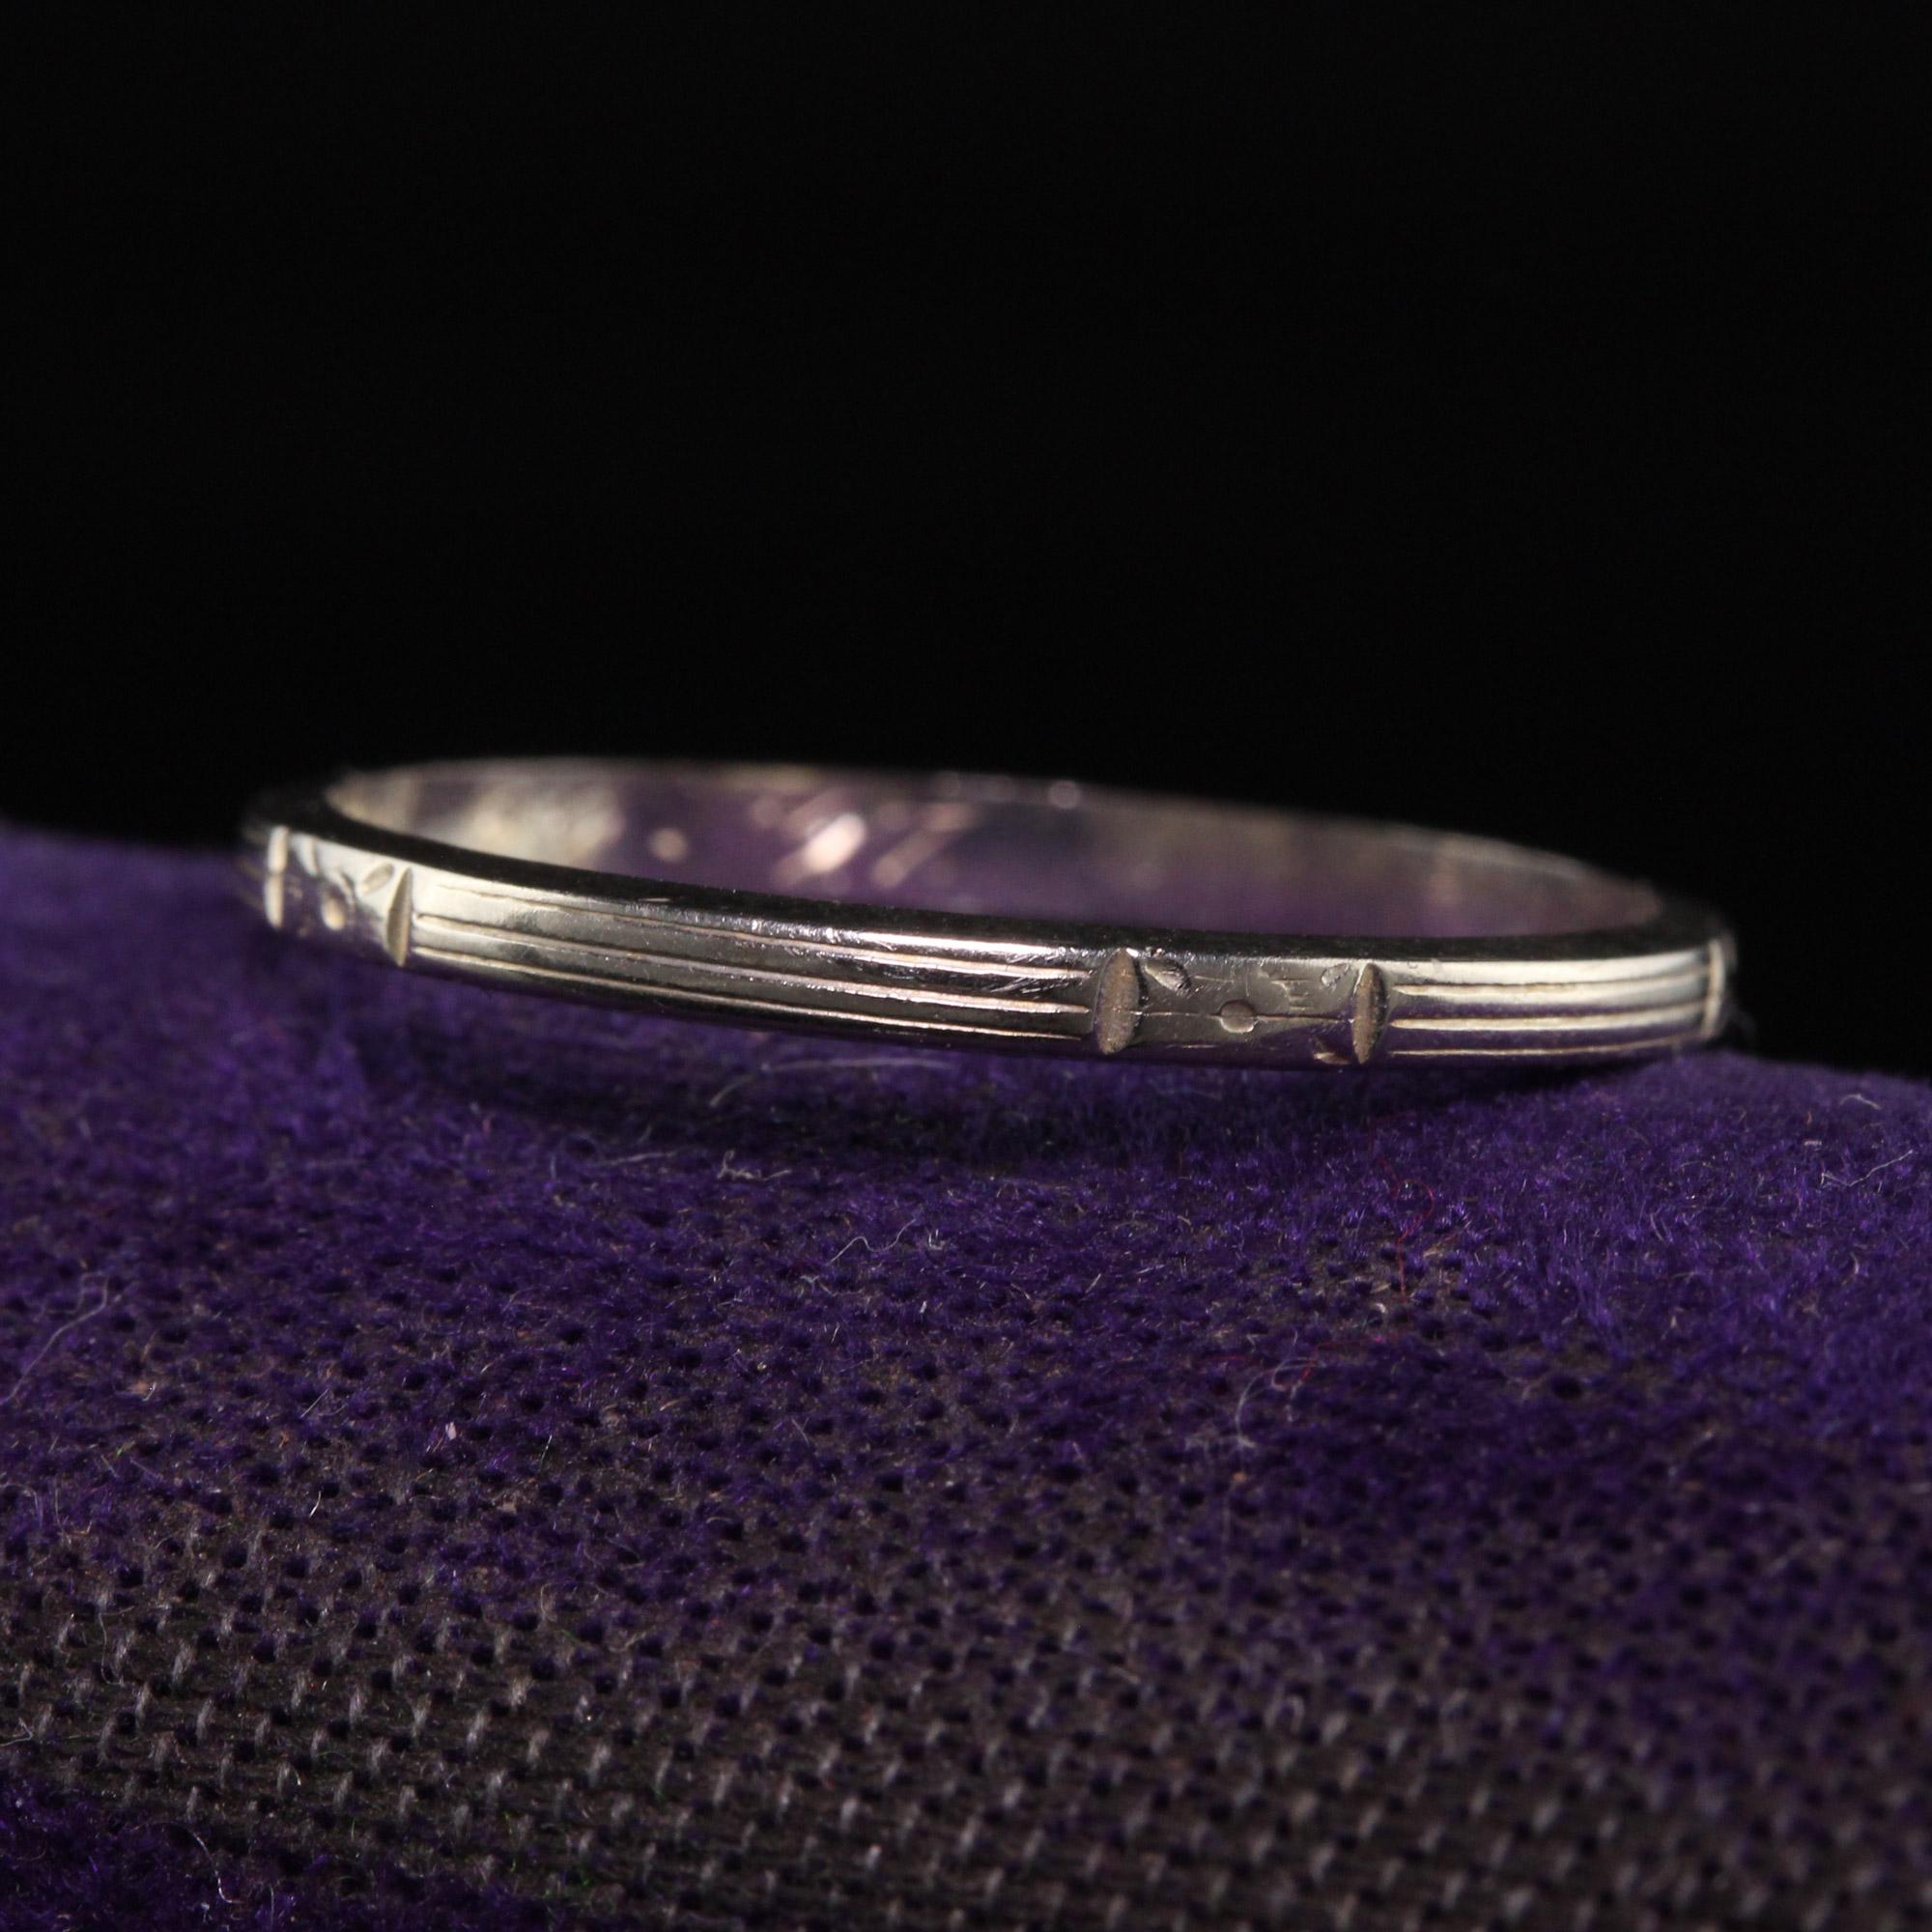 Beautiful Antique Art Deco 18K White Gold Engraved Wedding Band - Size 9. This beautiful band is crafted in 18k white gold. The band has blossom engravings on the top and has 